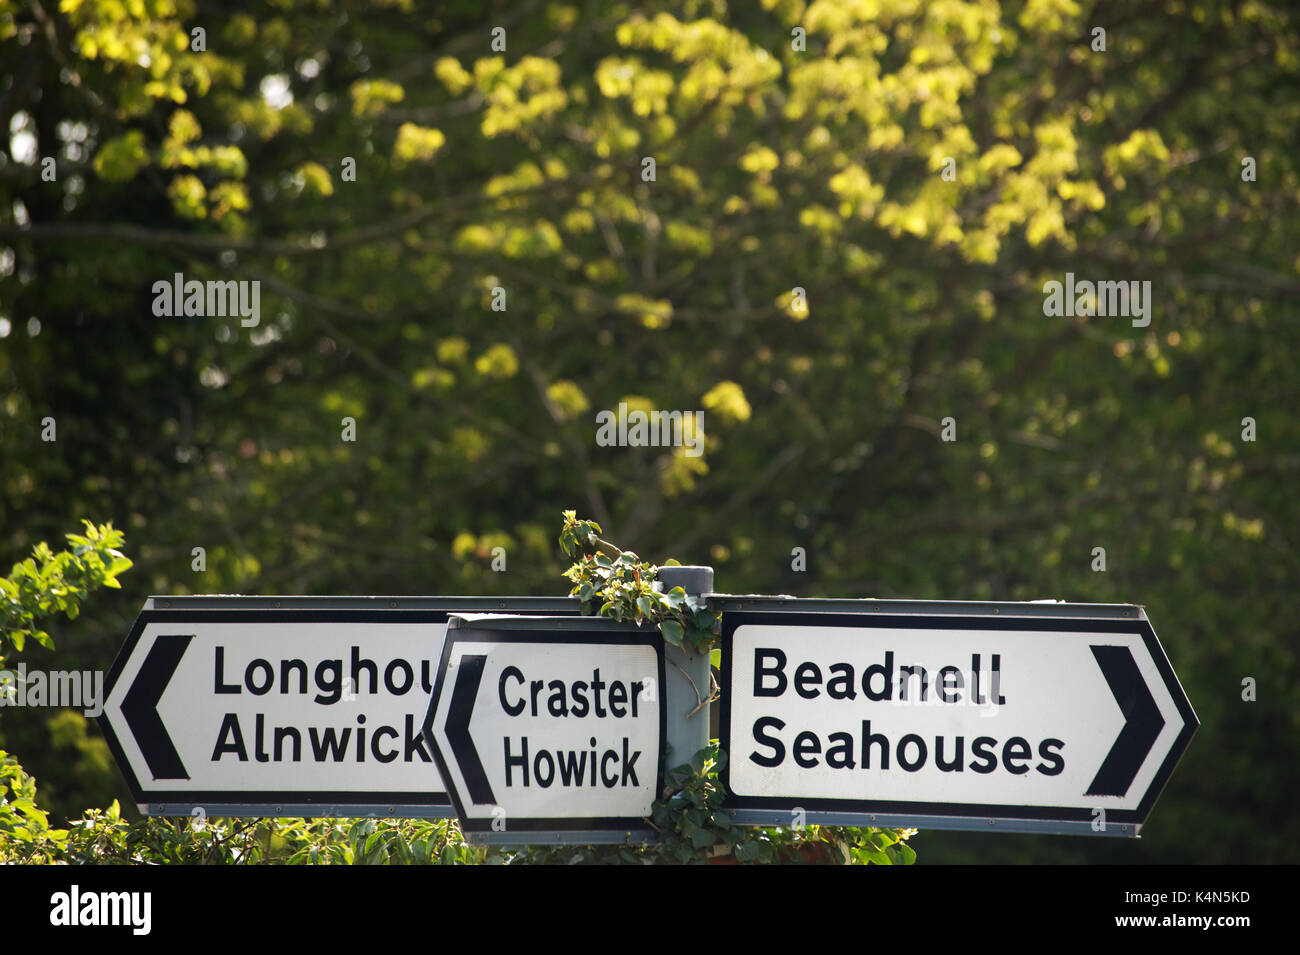 Craster, Howick, Alnwick, Beadnell, Largs, Longhoughton road sign in Embleton, Northumberland , Banque D'Images